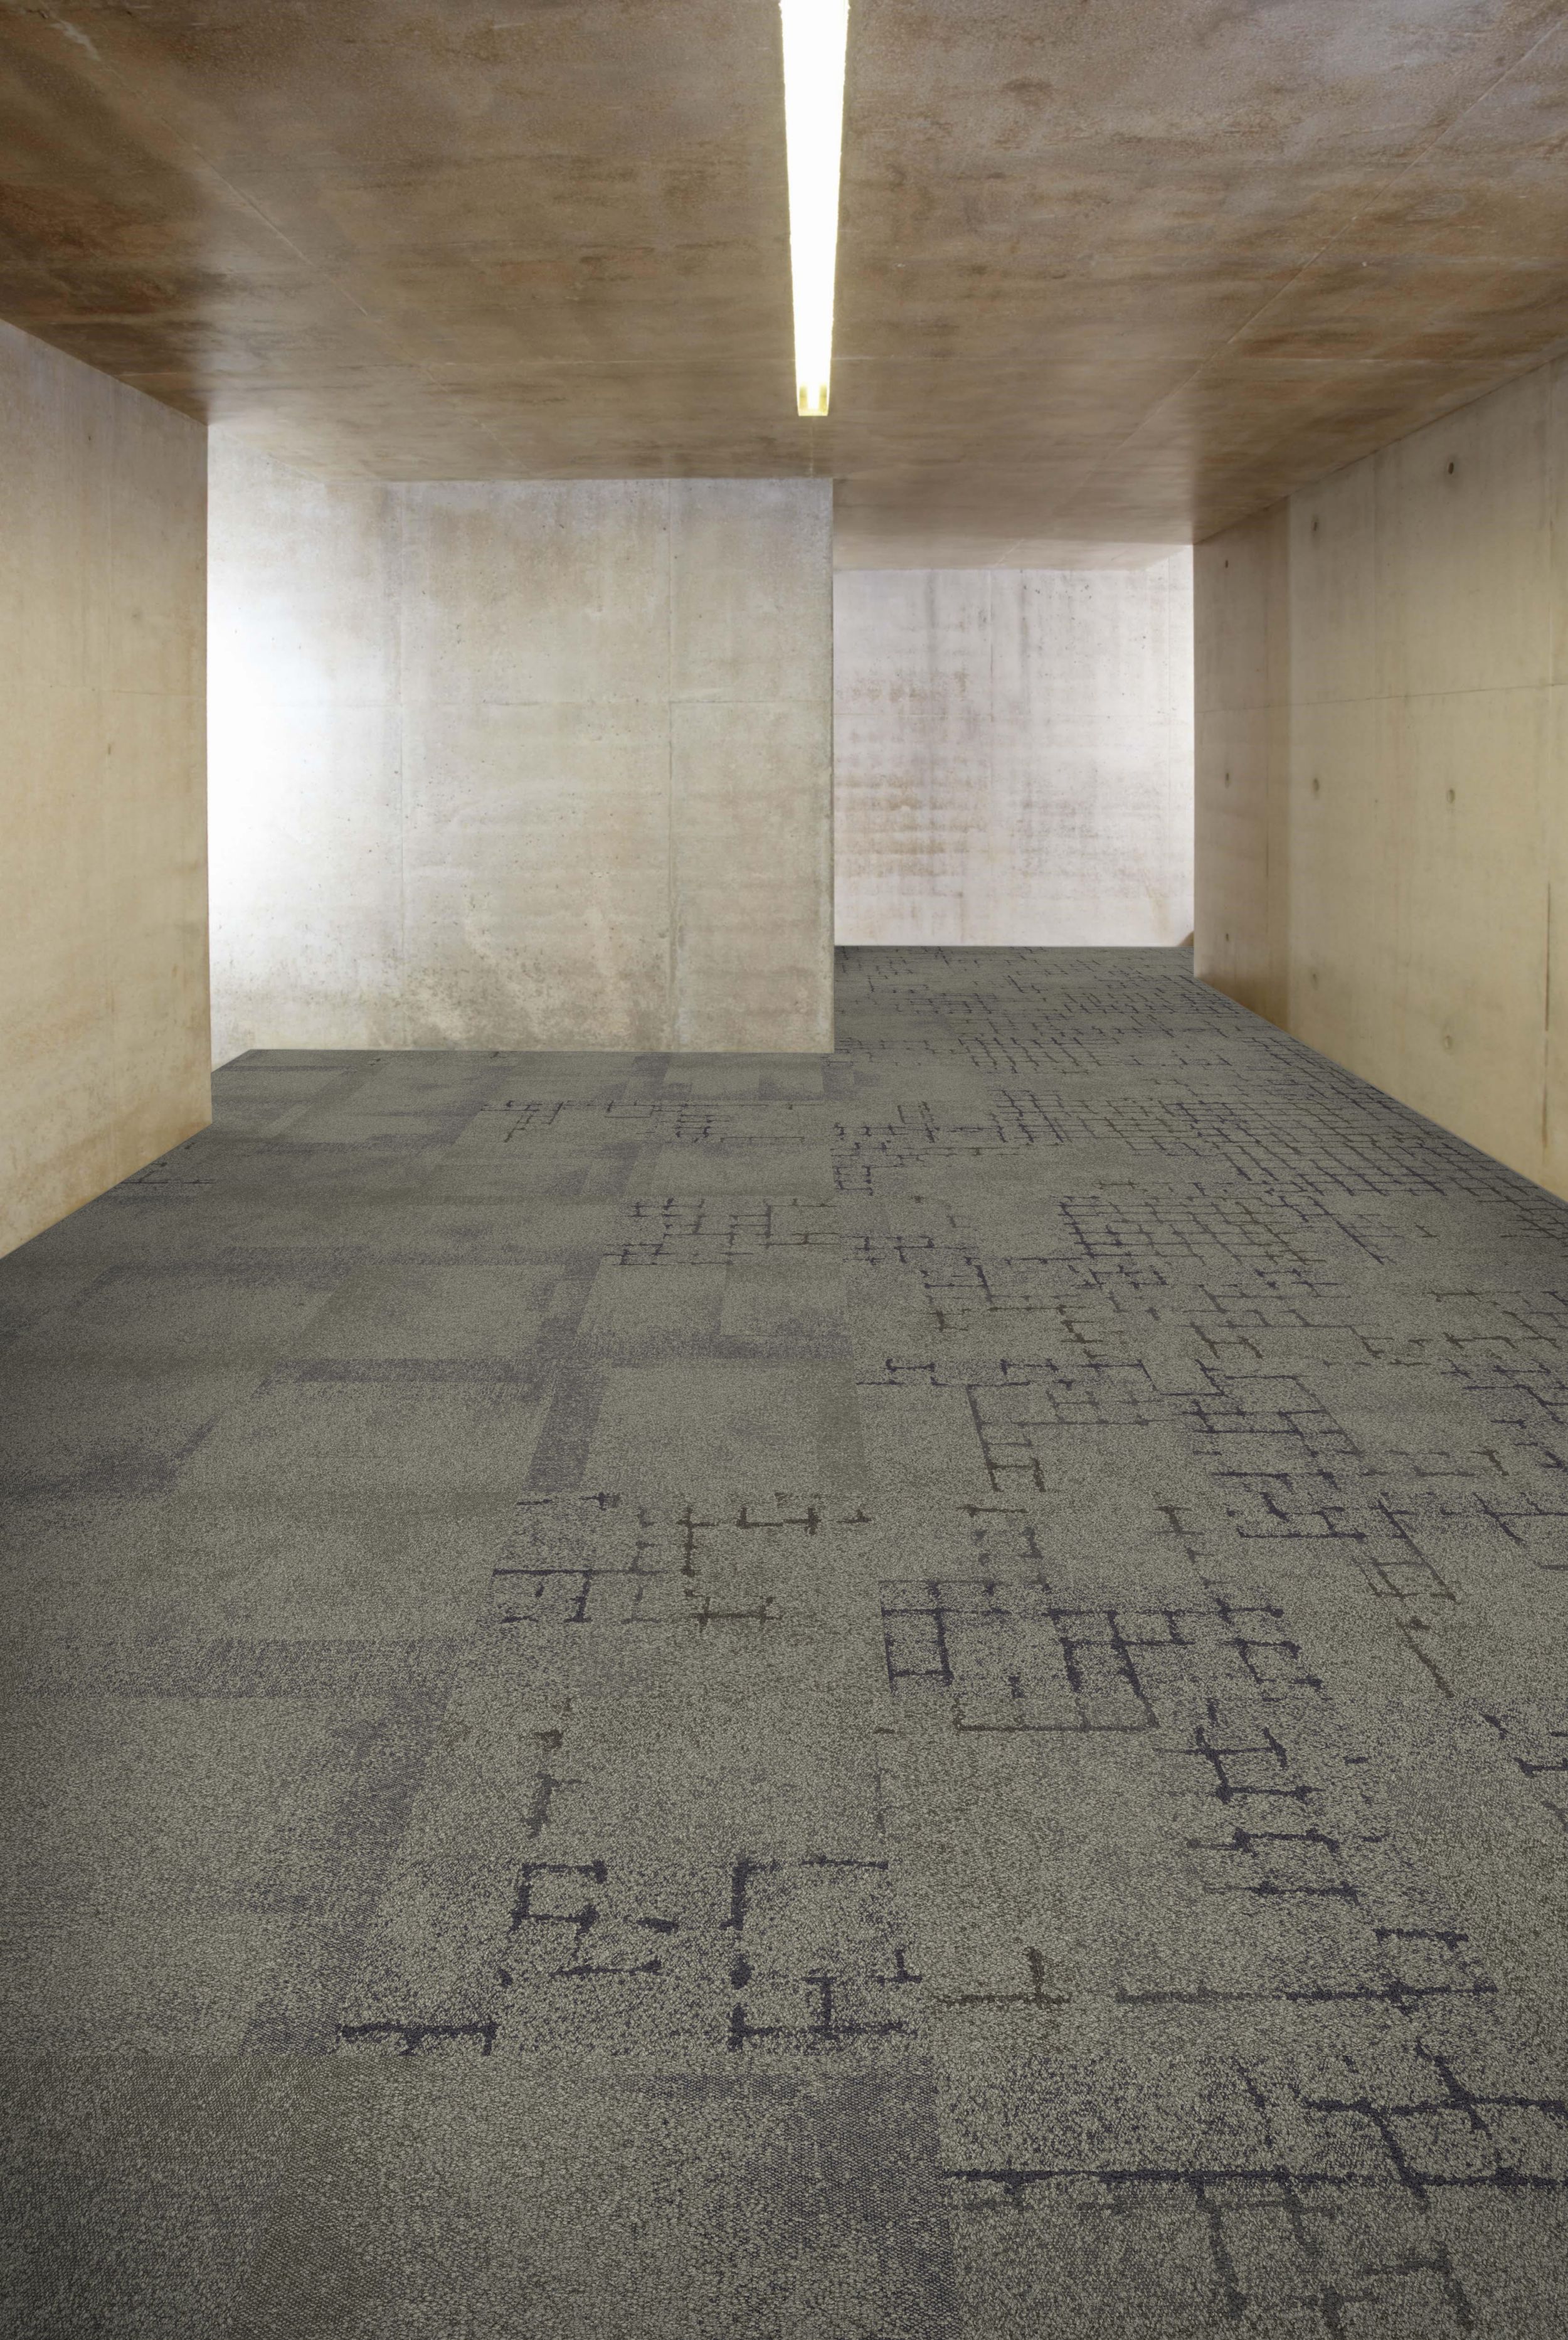 Interface Flagstone, Kerbstone and Sett in Stone carpet tile in corridor with concrete walls and ceiling número de imagen 6